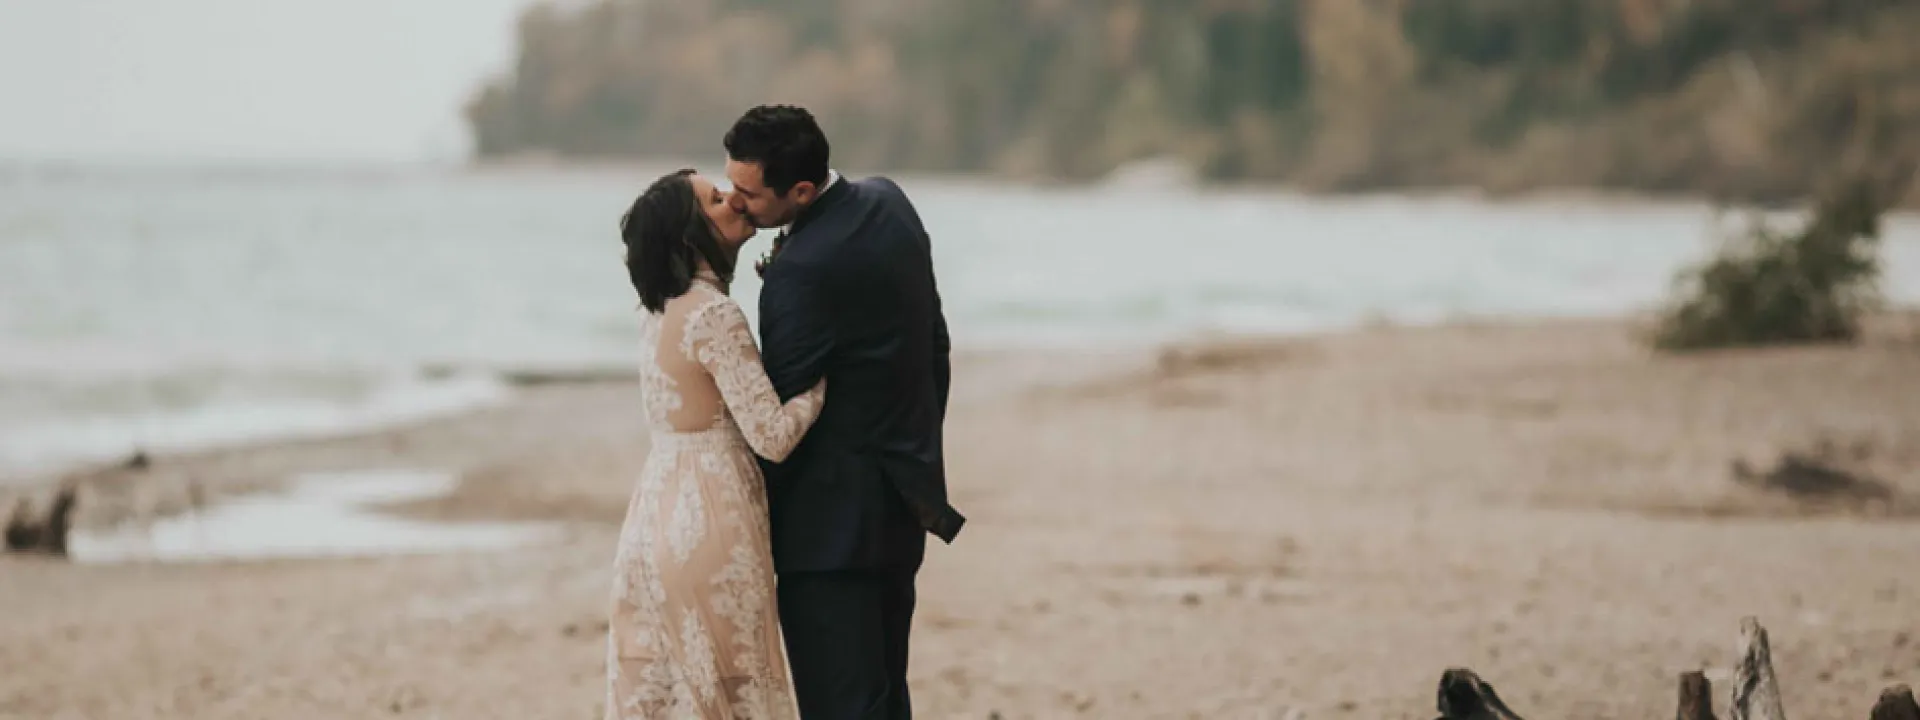 The bride, wearing Free People, kisses her groom on the beach at Grant Park